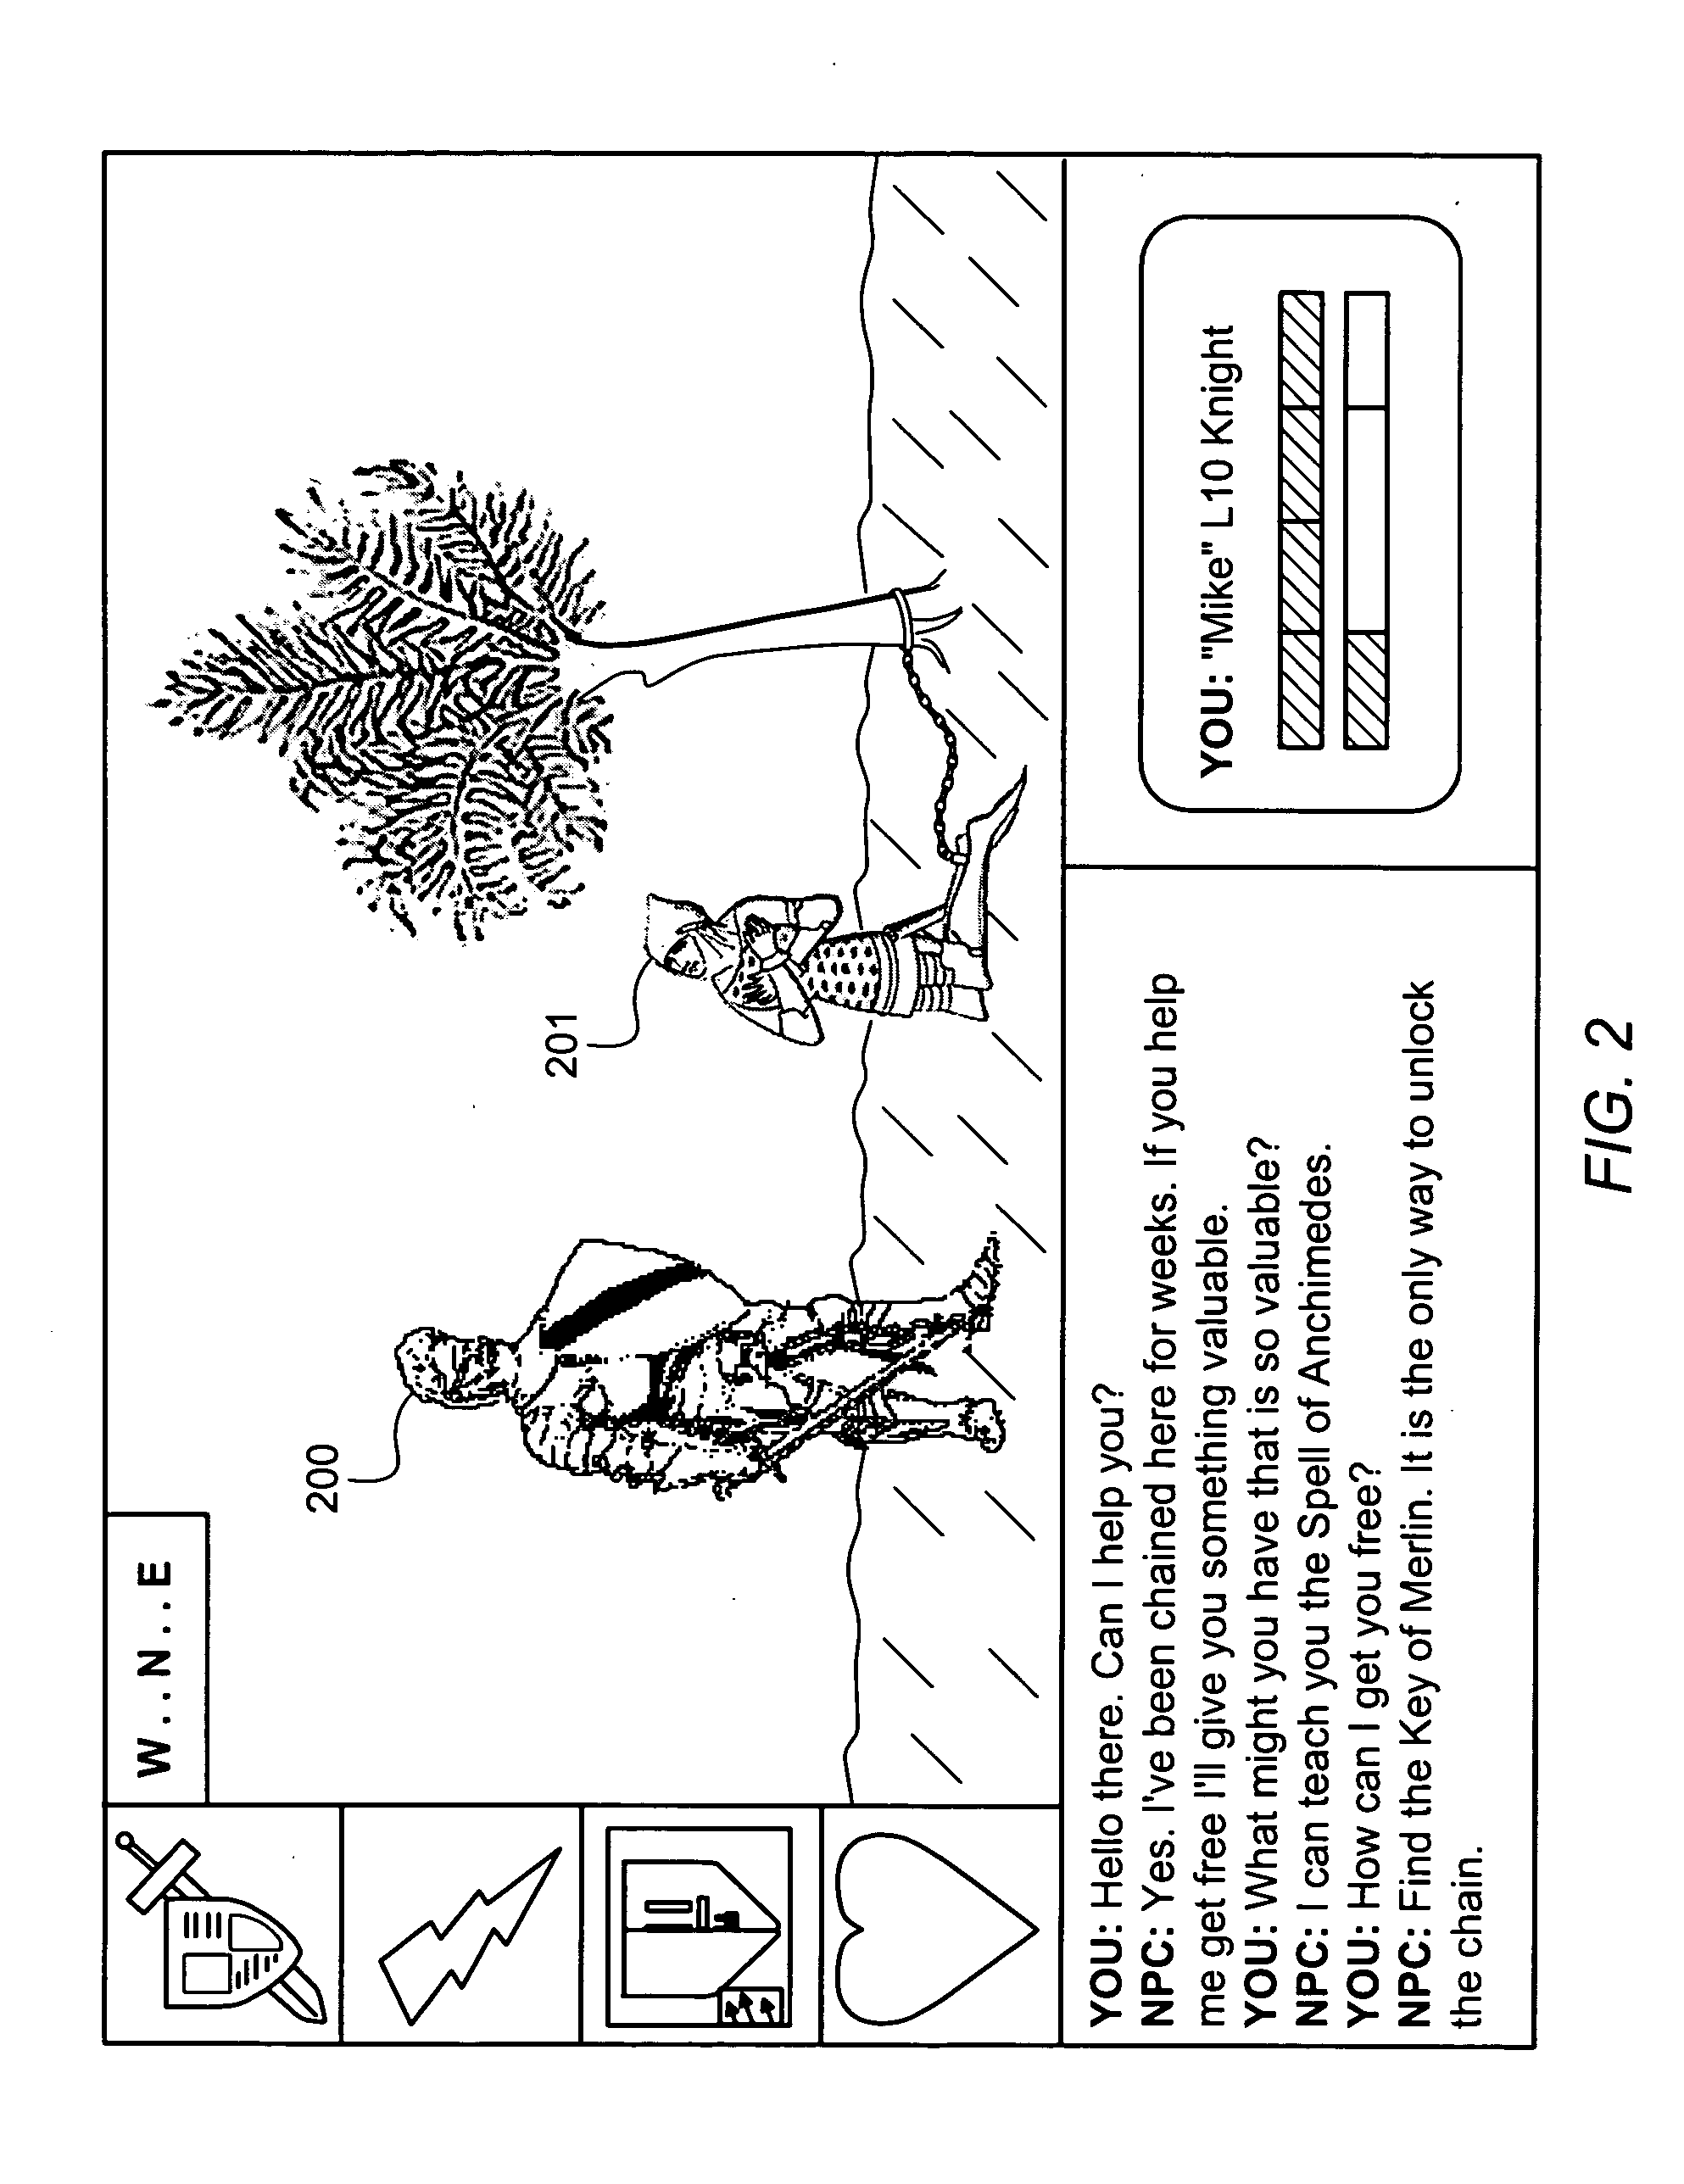 Method for dynamic content generation in a role-playing game